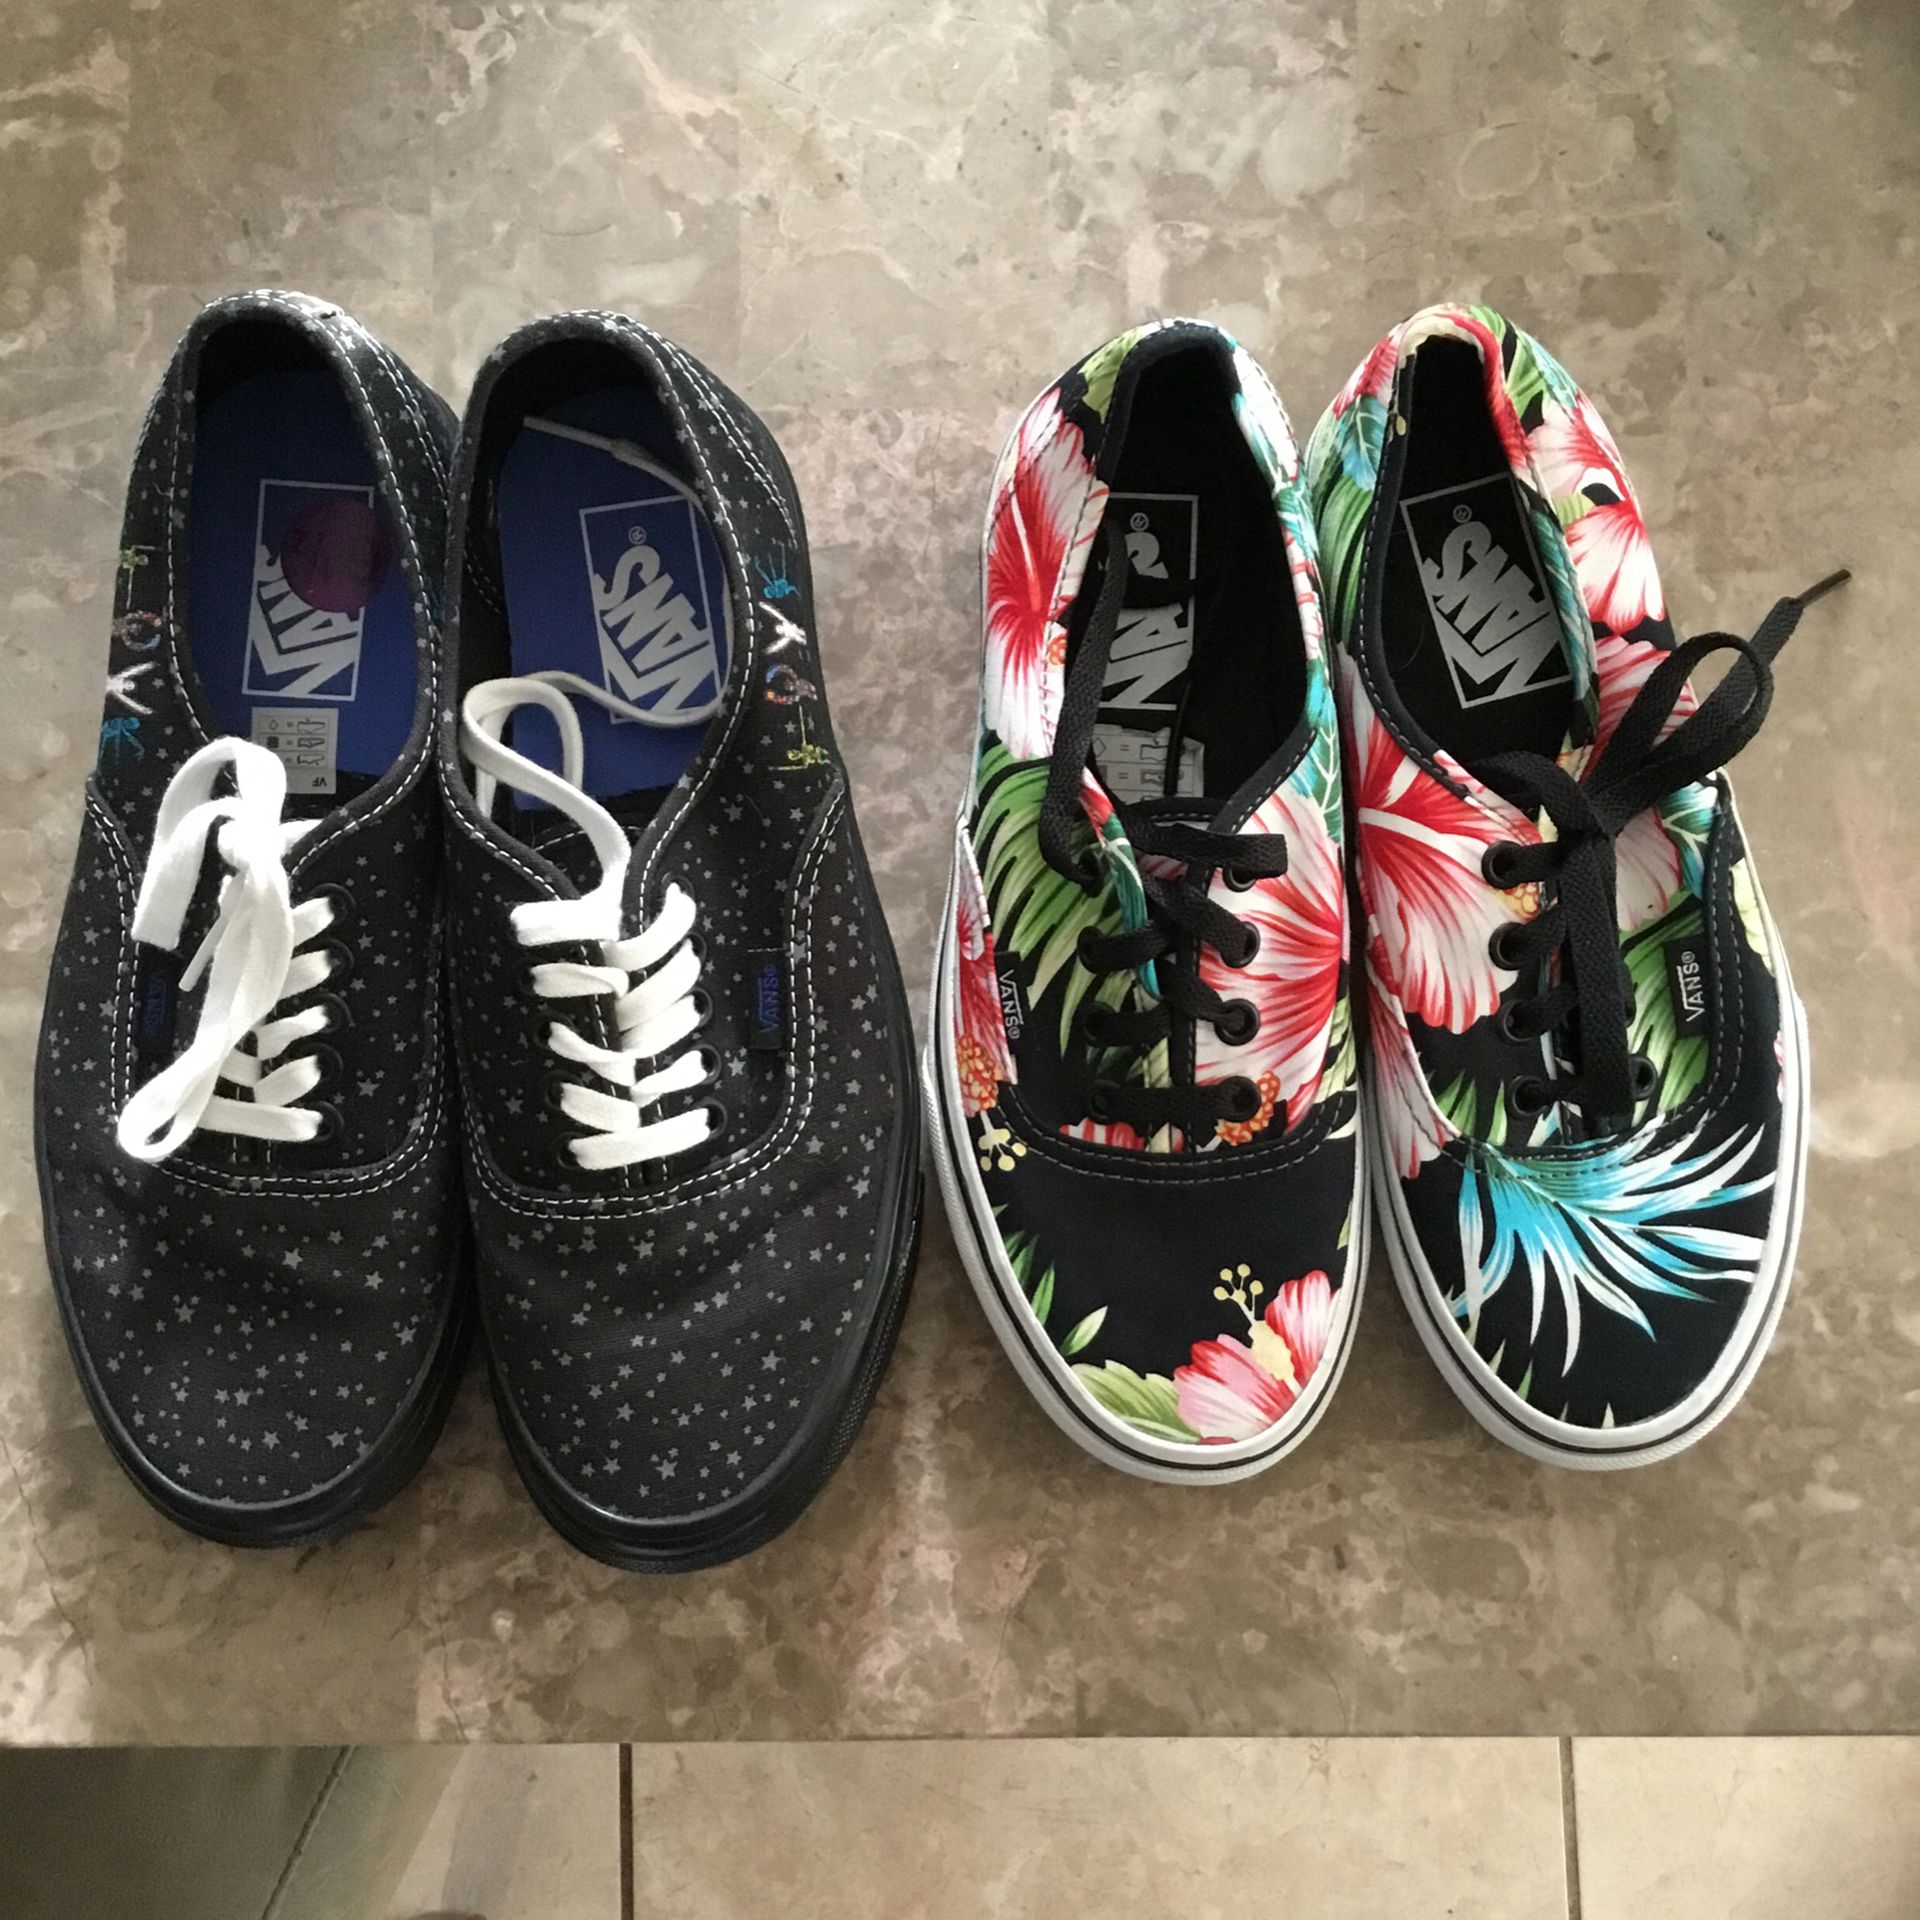 2 Pairs Of Vans Off The Wall Shoes